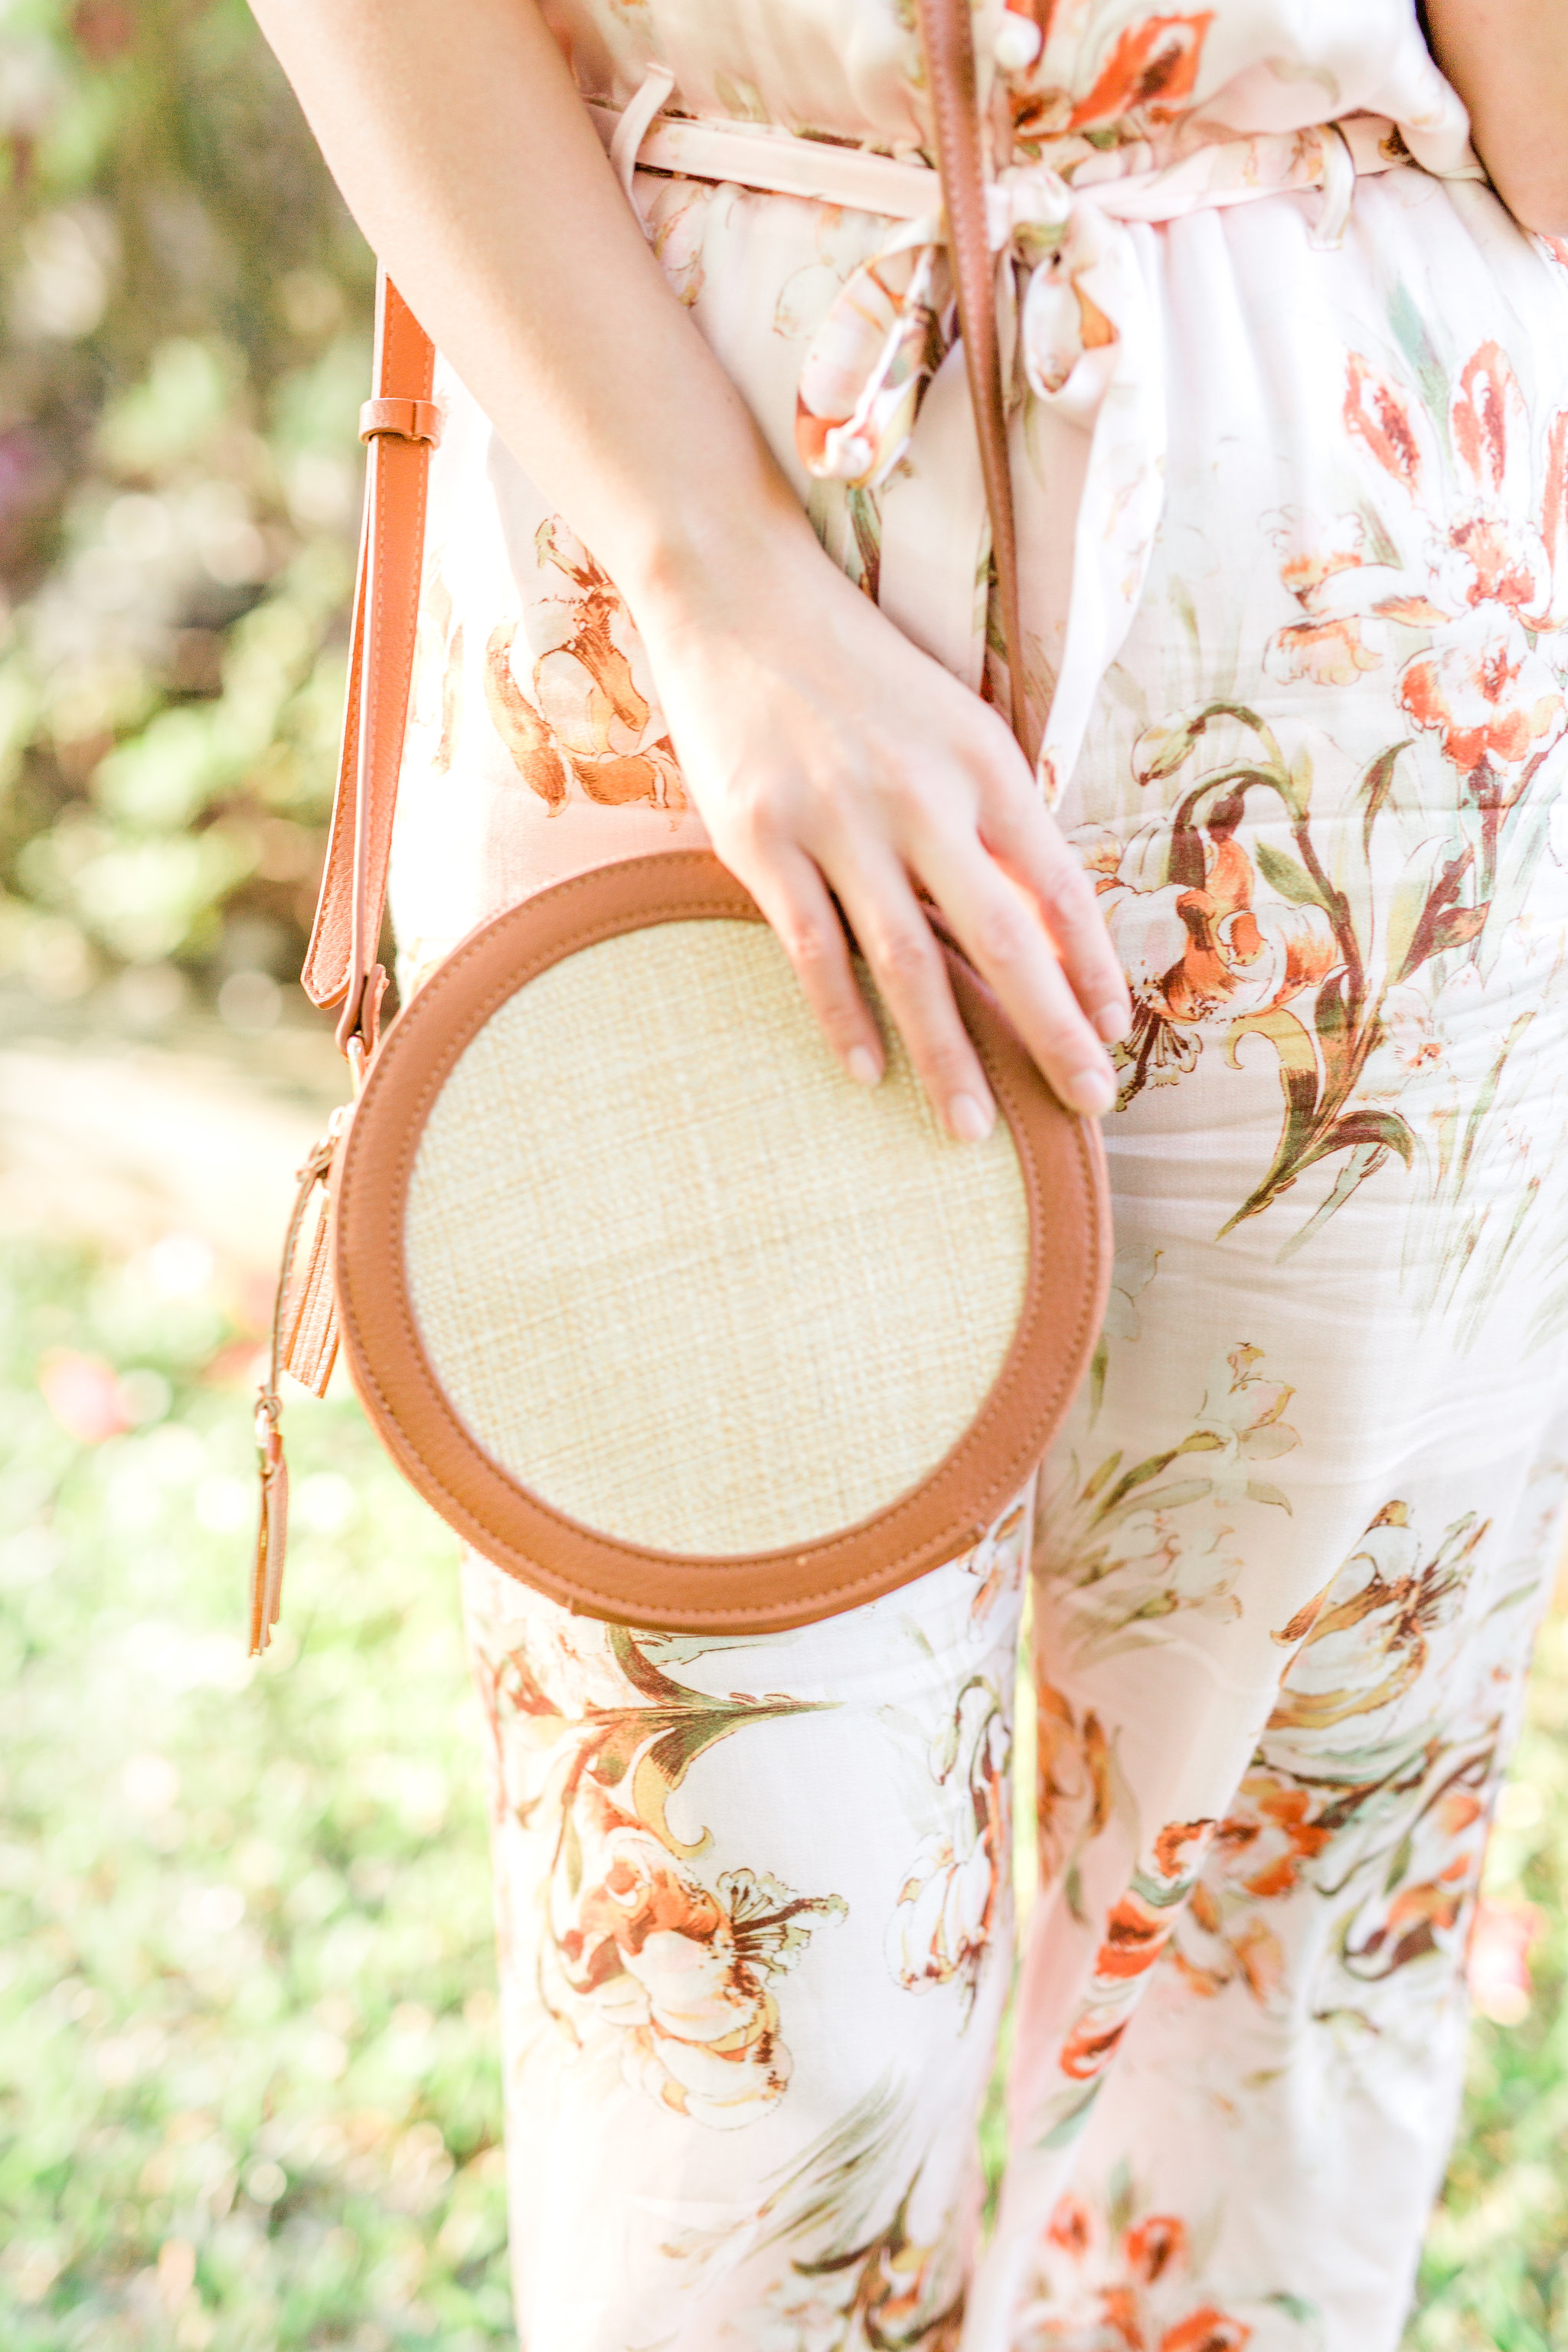 oyfullygreen First Tim Stitch Fix Spring Summer Review with Coupon Code Round Straw Crossbody Bag.jpg